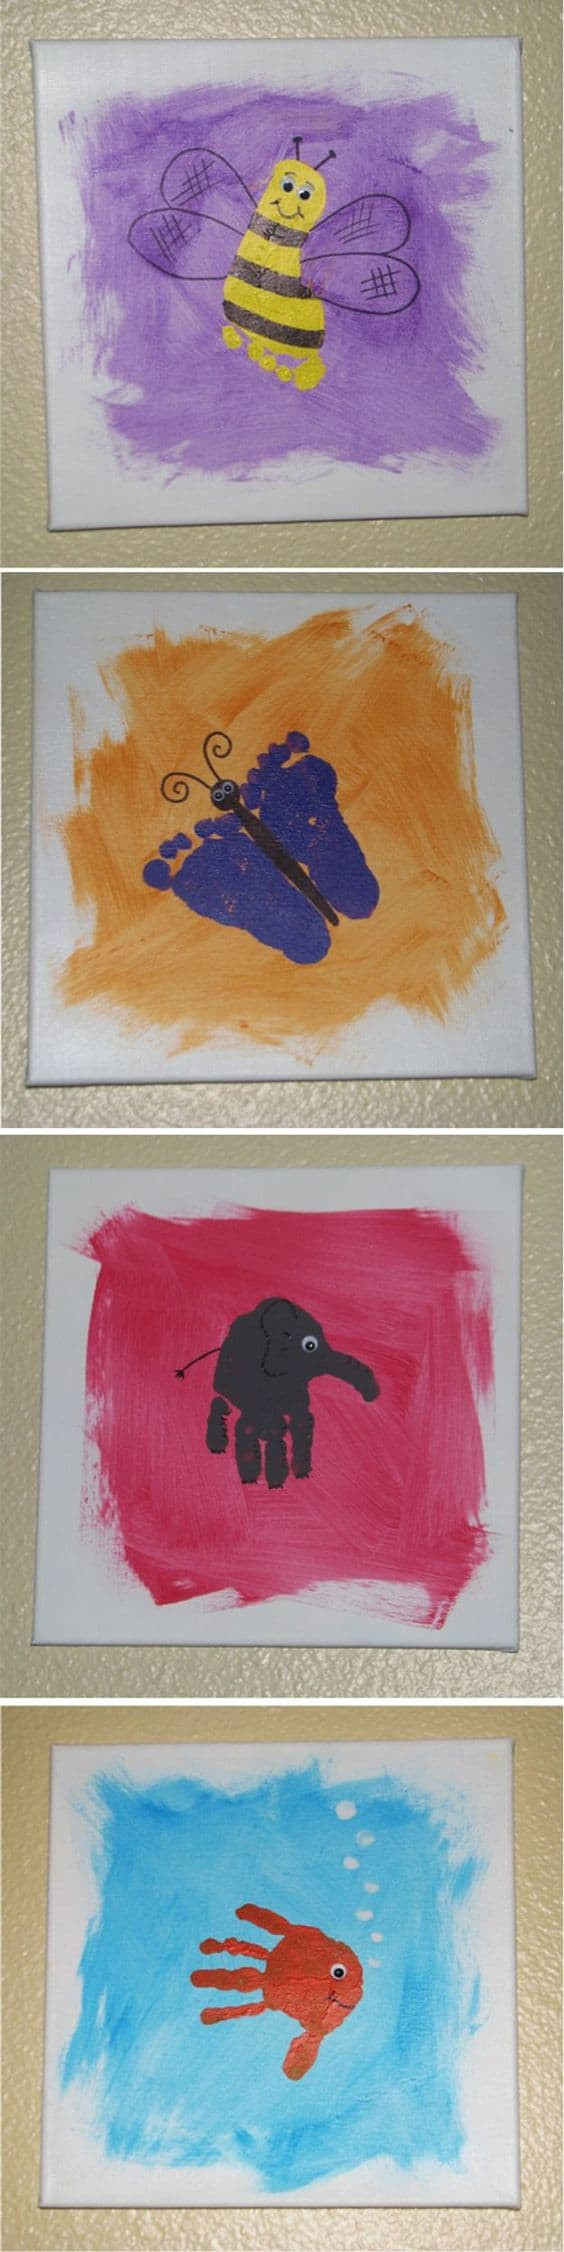 Canvas Painting Ideas For Kids
 19 Fun And Easy Painting Ideas For Kids